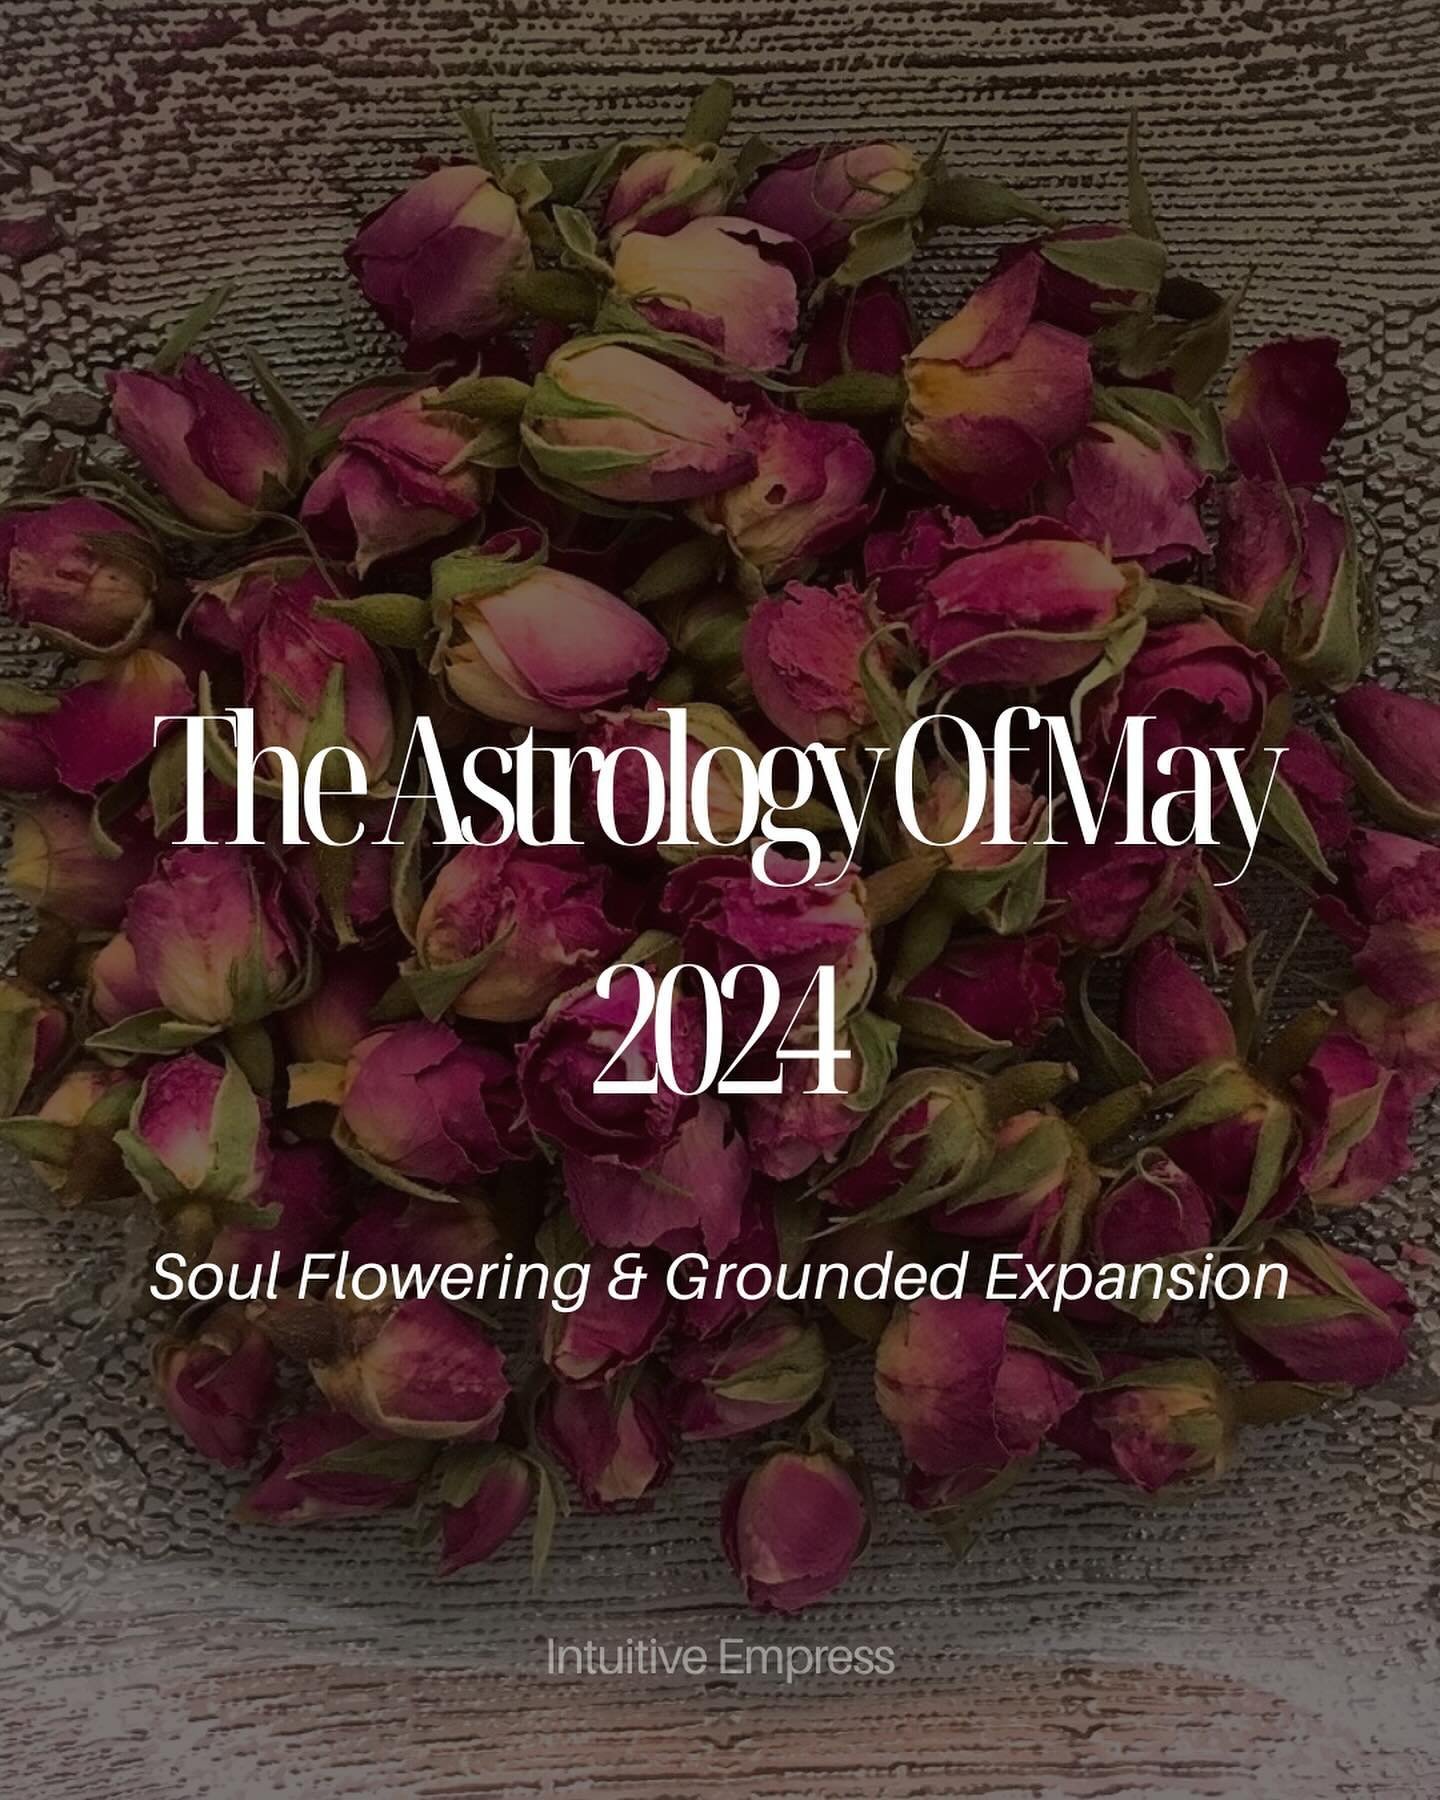 THE ASTROLOGY OF MAY 2024 💐 For More Energy Updates, Receive My Newsletter 𝓛𝓲𝓷𝓴 𝓲𝓷 𝓫𝓲𝓸